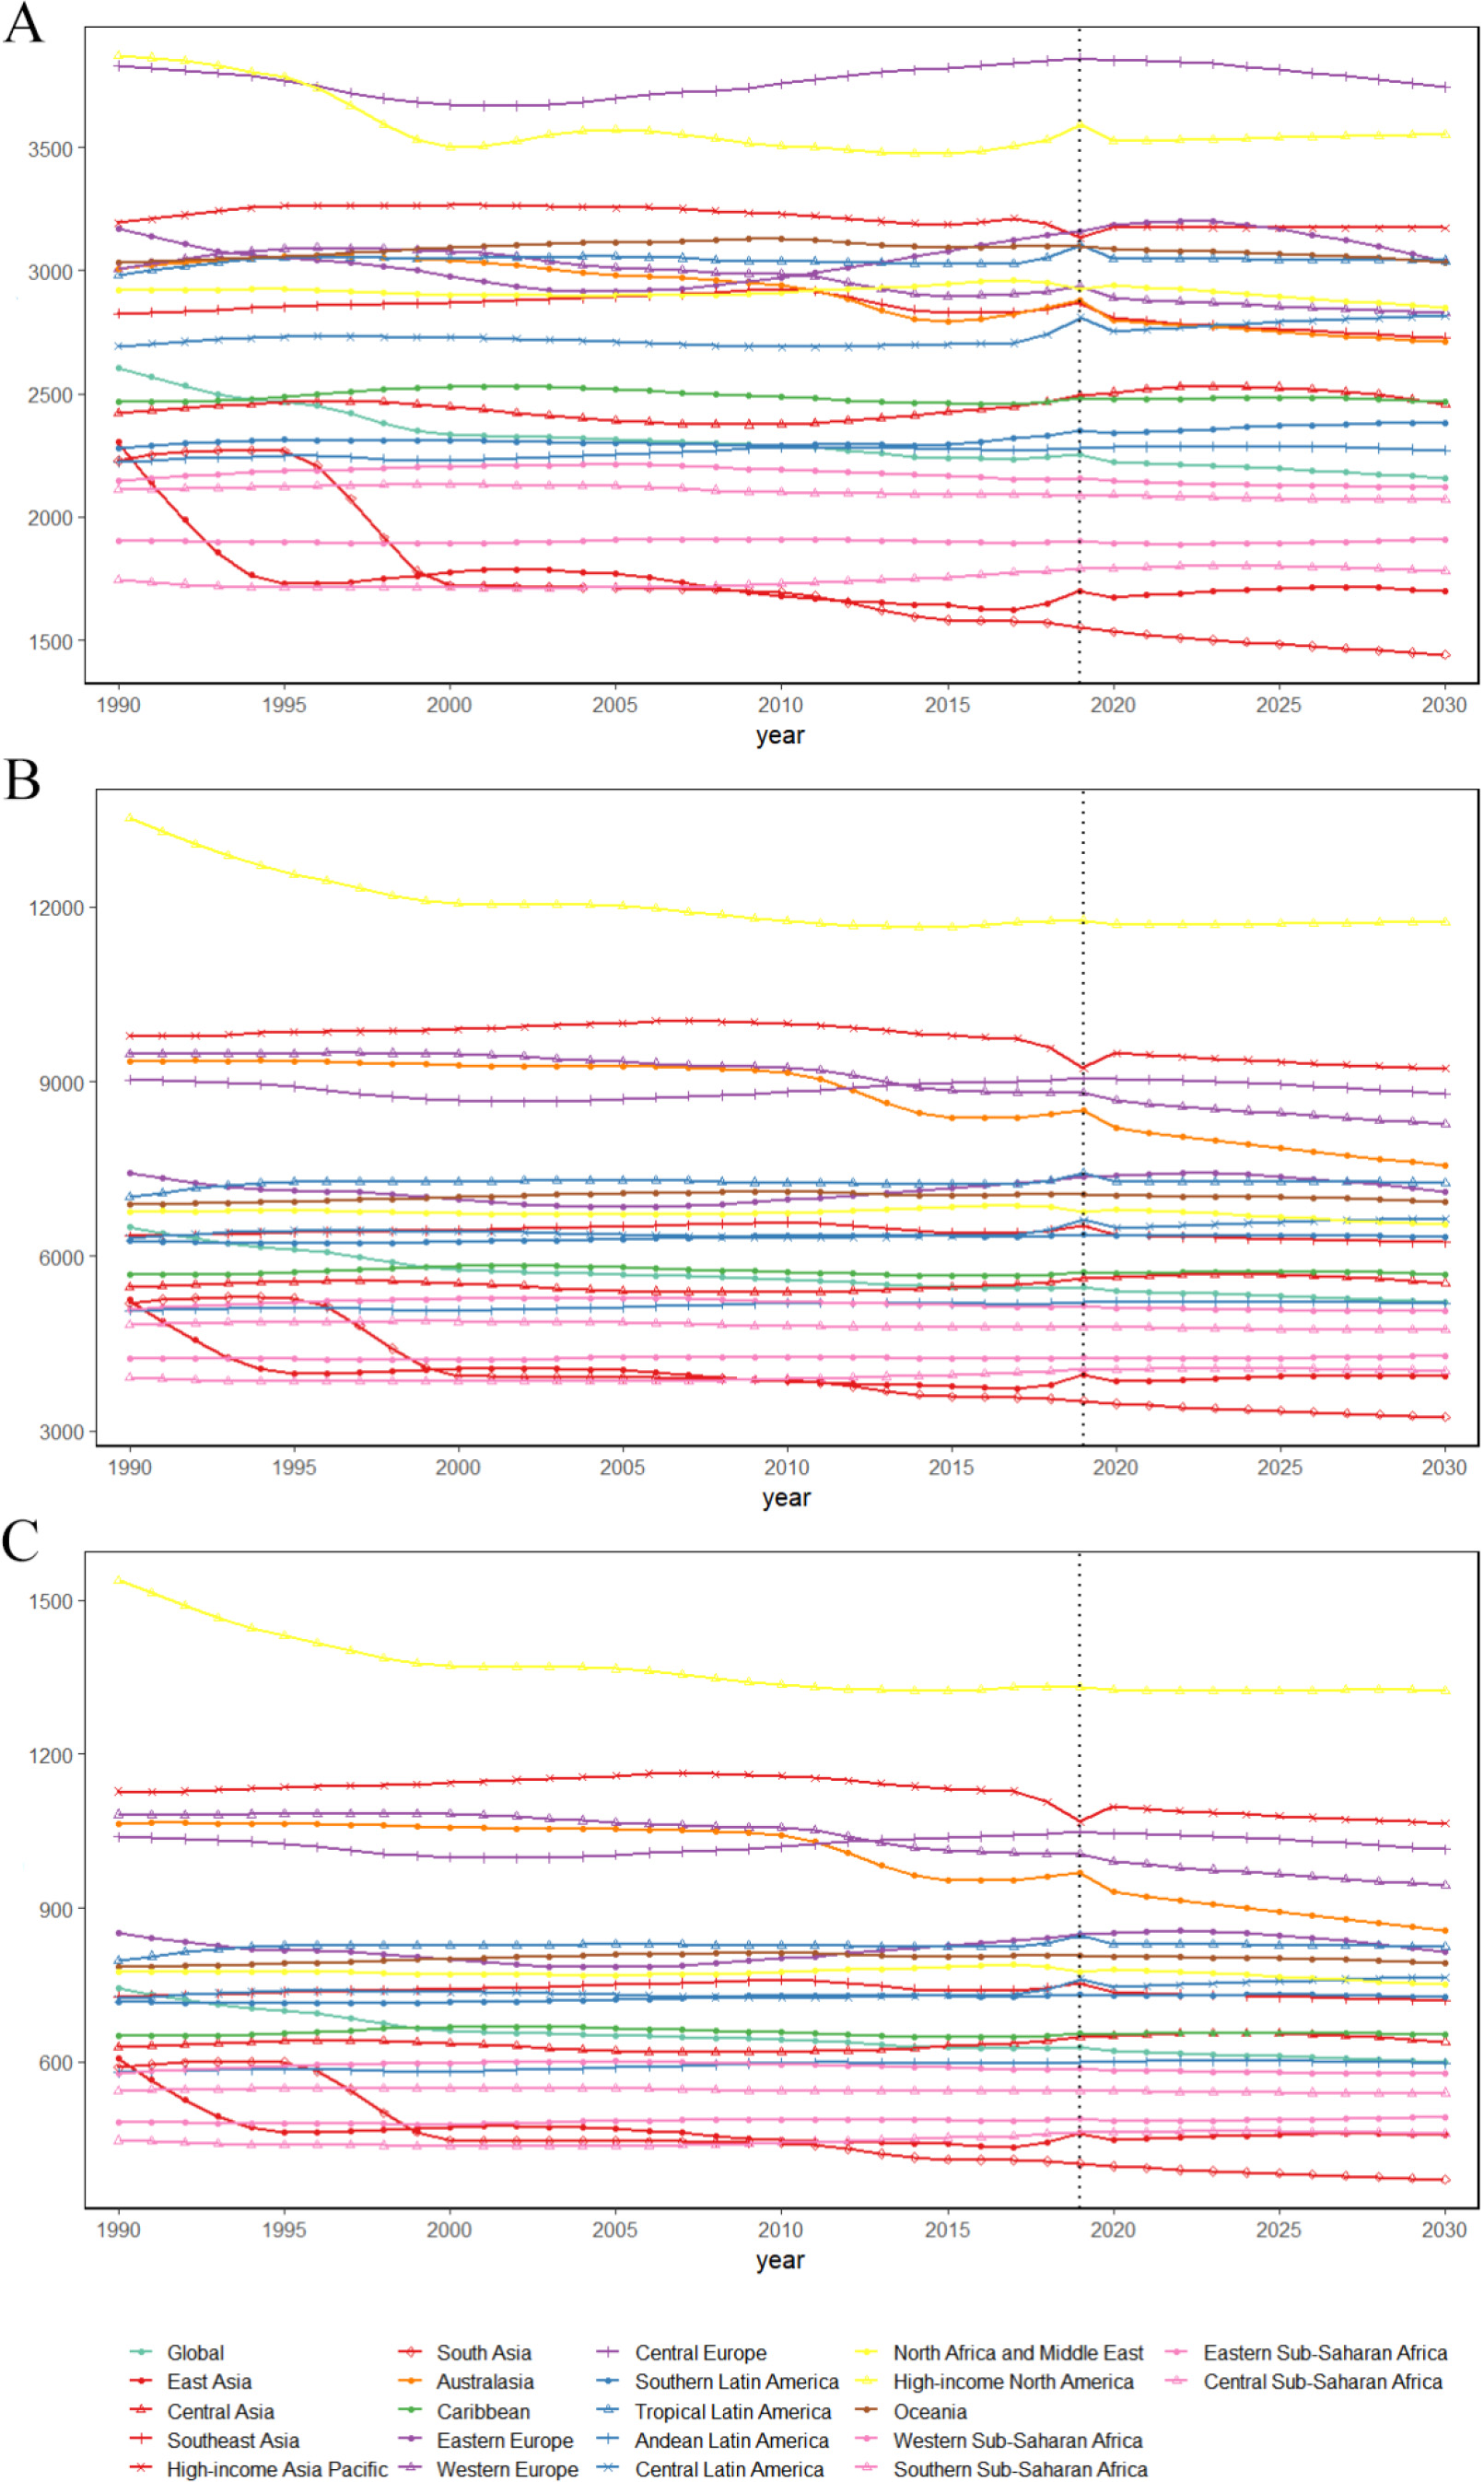 Prediction of incidence rate, prevalence rate and DALYs rate of low back pain from 1990–2030. (A) Plots of incidence rate; (B) Plots of prevalence rate; (C) Plots of DALYs rate.